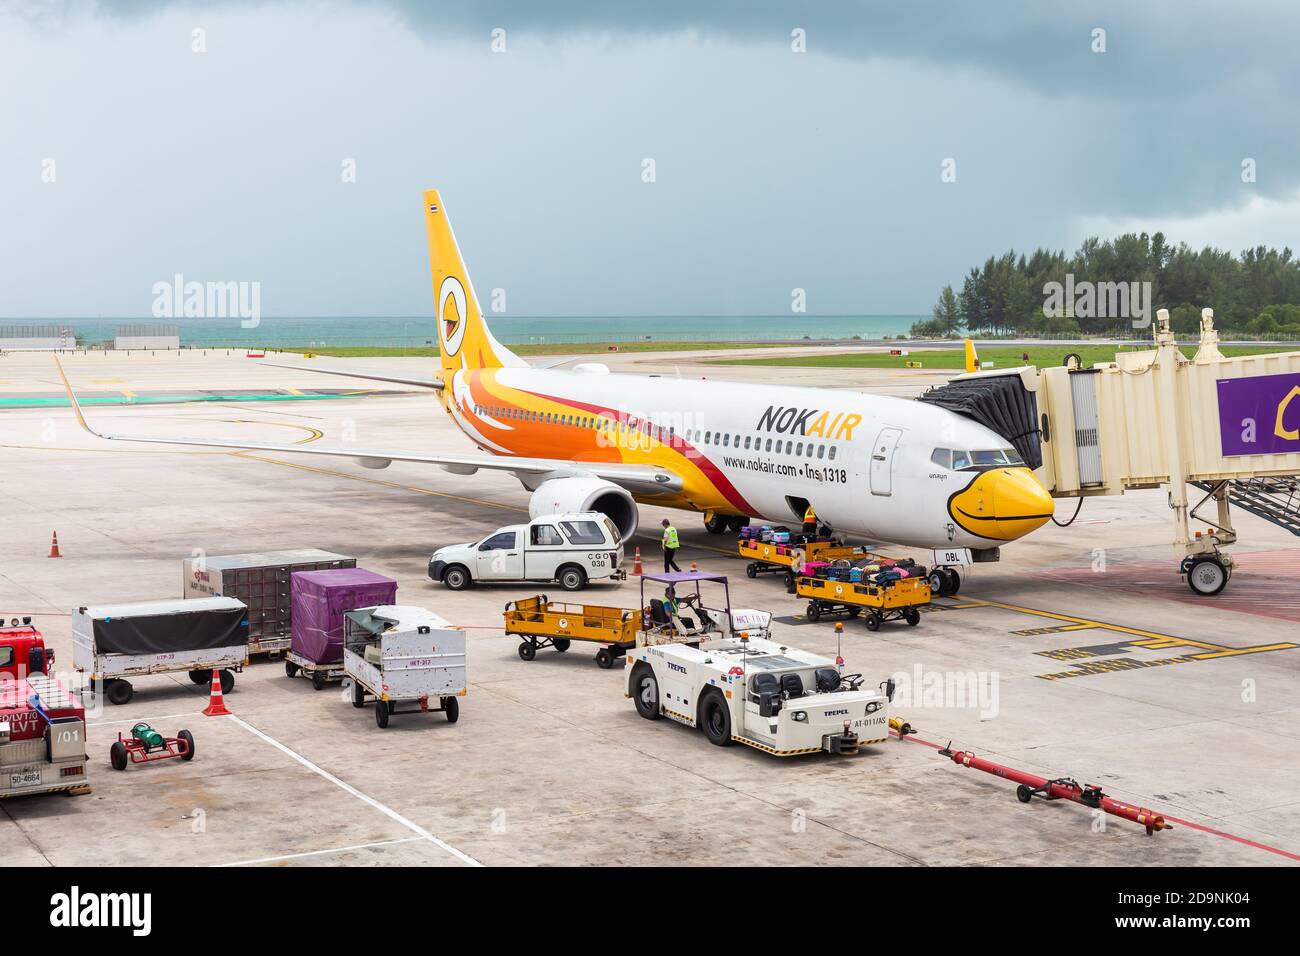 Phuket Thailand - May 29,2016 : The plane of Nok air that is parked on Phuket International Airport is waiting to transport people by weaving both dom Stock Photo